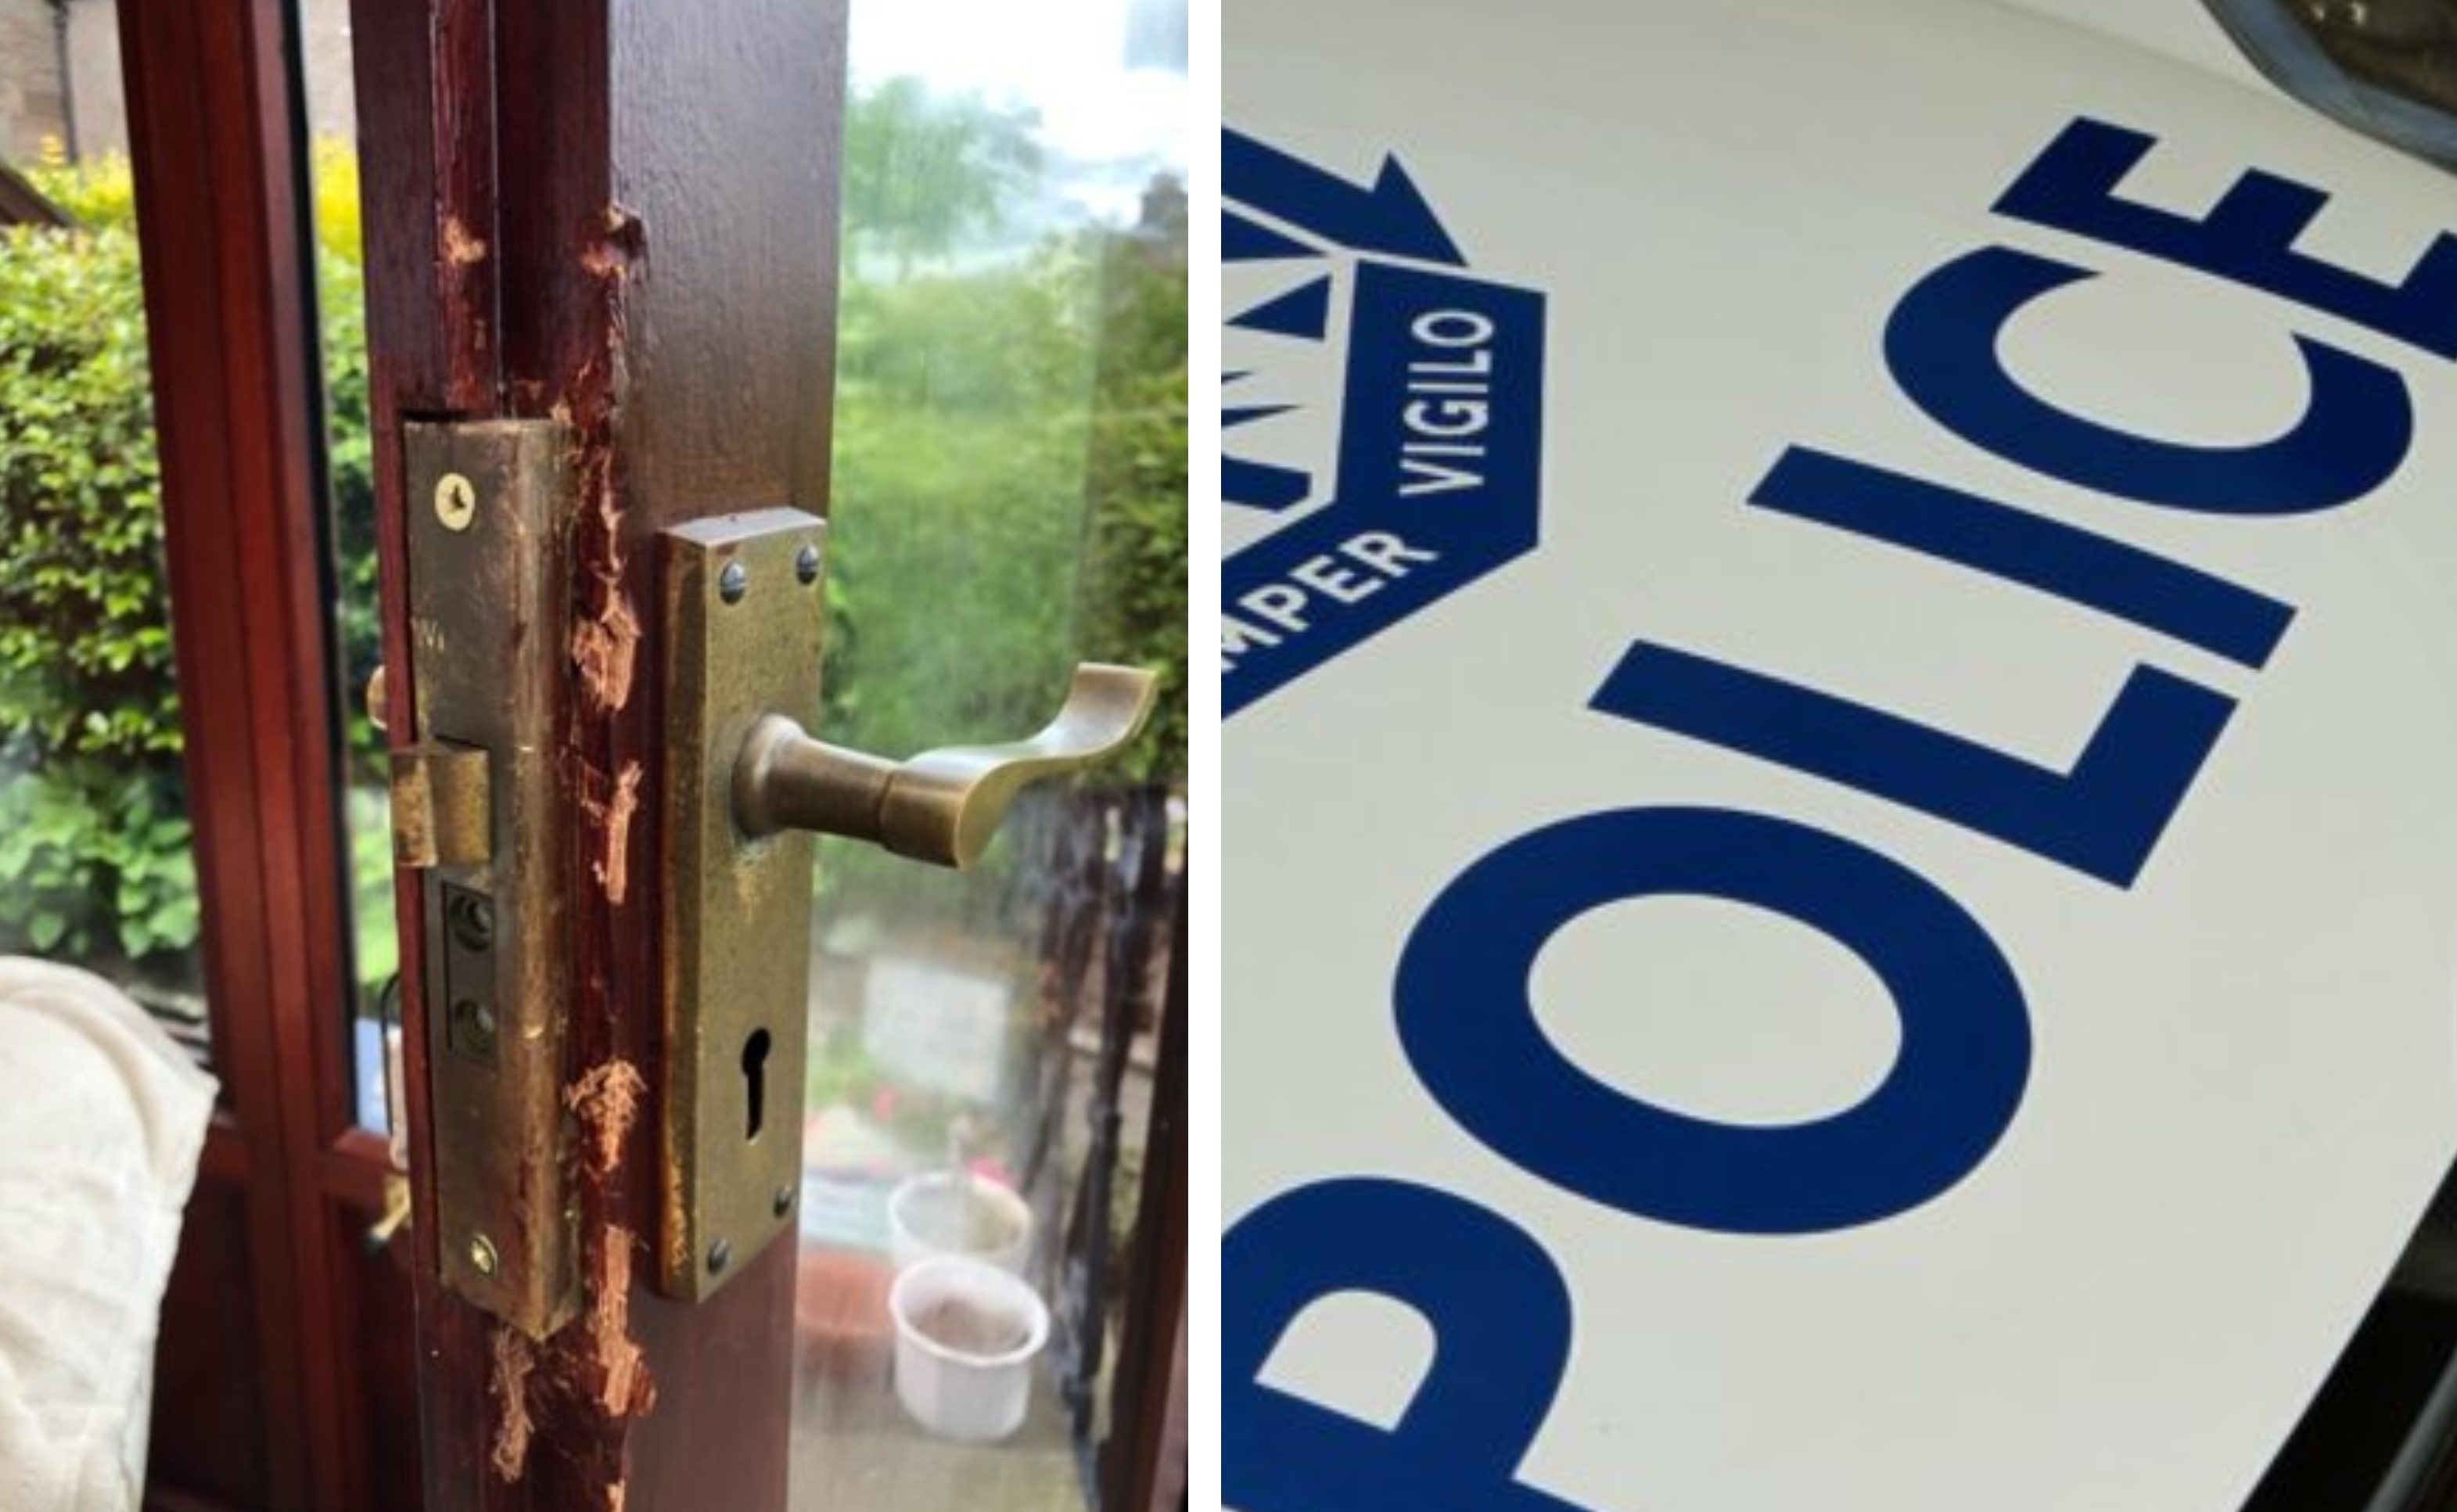 Thieves broke into a number of homes in the Craigie area of Perth.